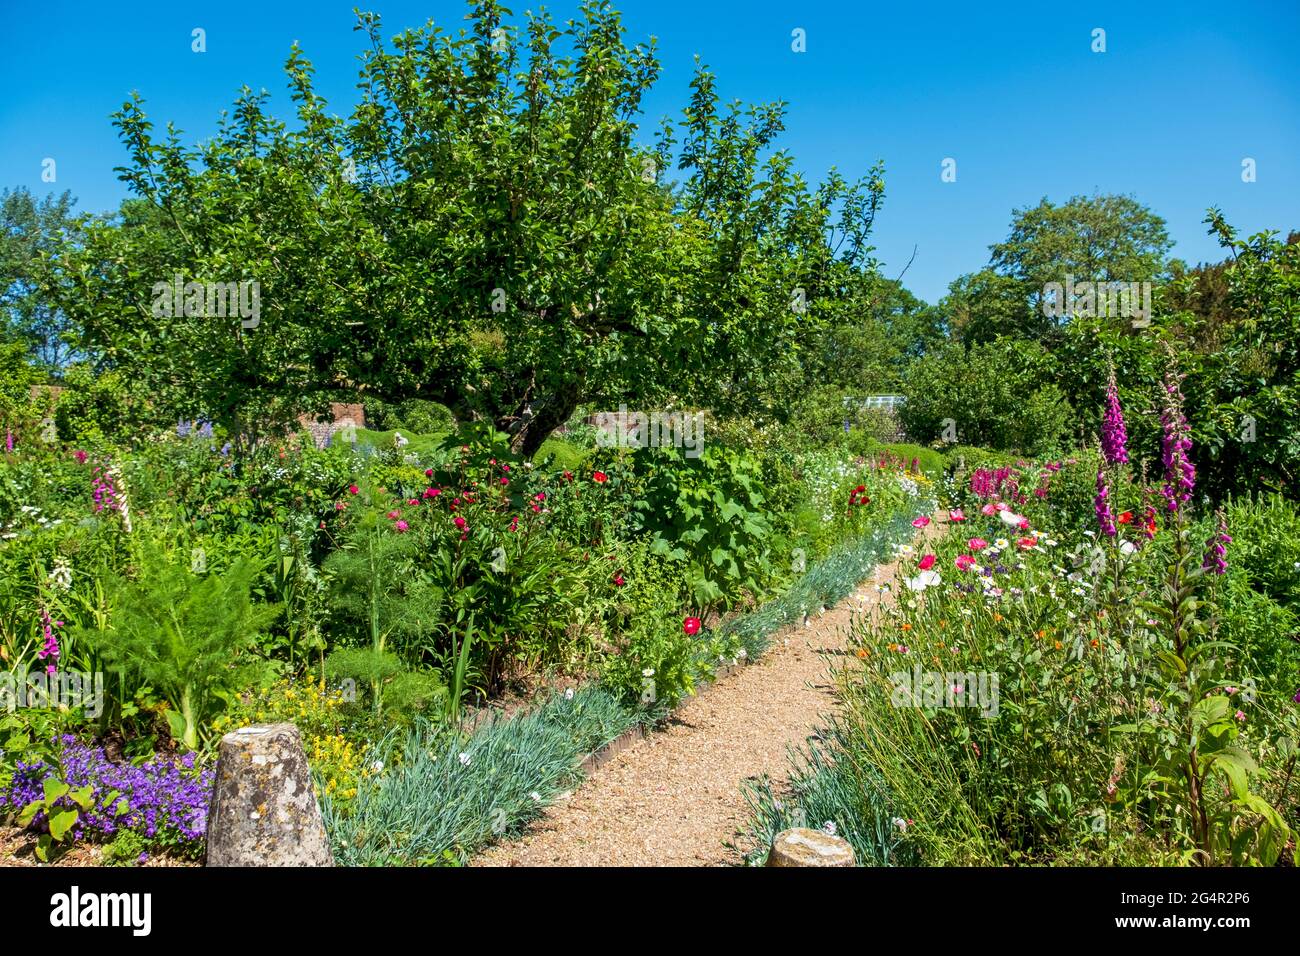 Herbaceous borders, Charleston Farmhouse, East Sussex home of Bloomsbury set artists Vanessa Bell and Duncan Grant, West Firle, South Downs, England Stock Photo